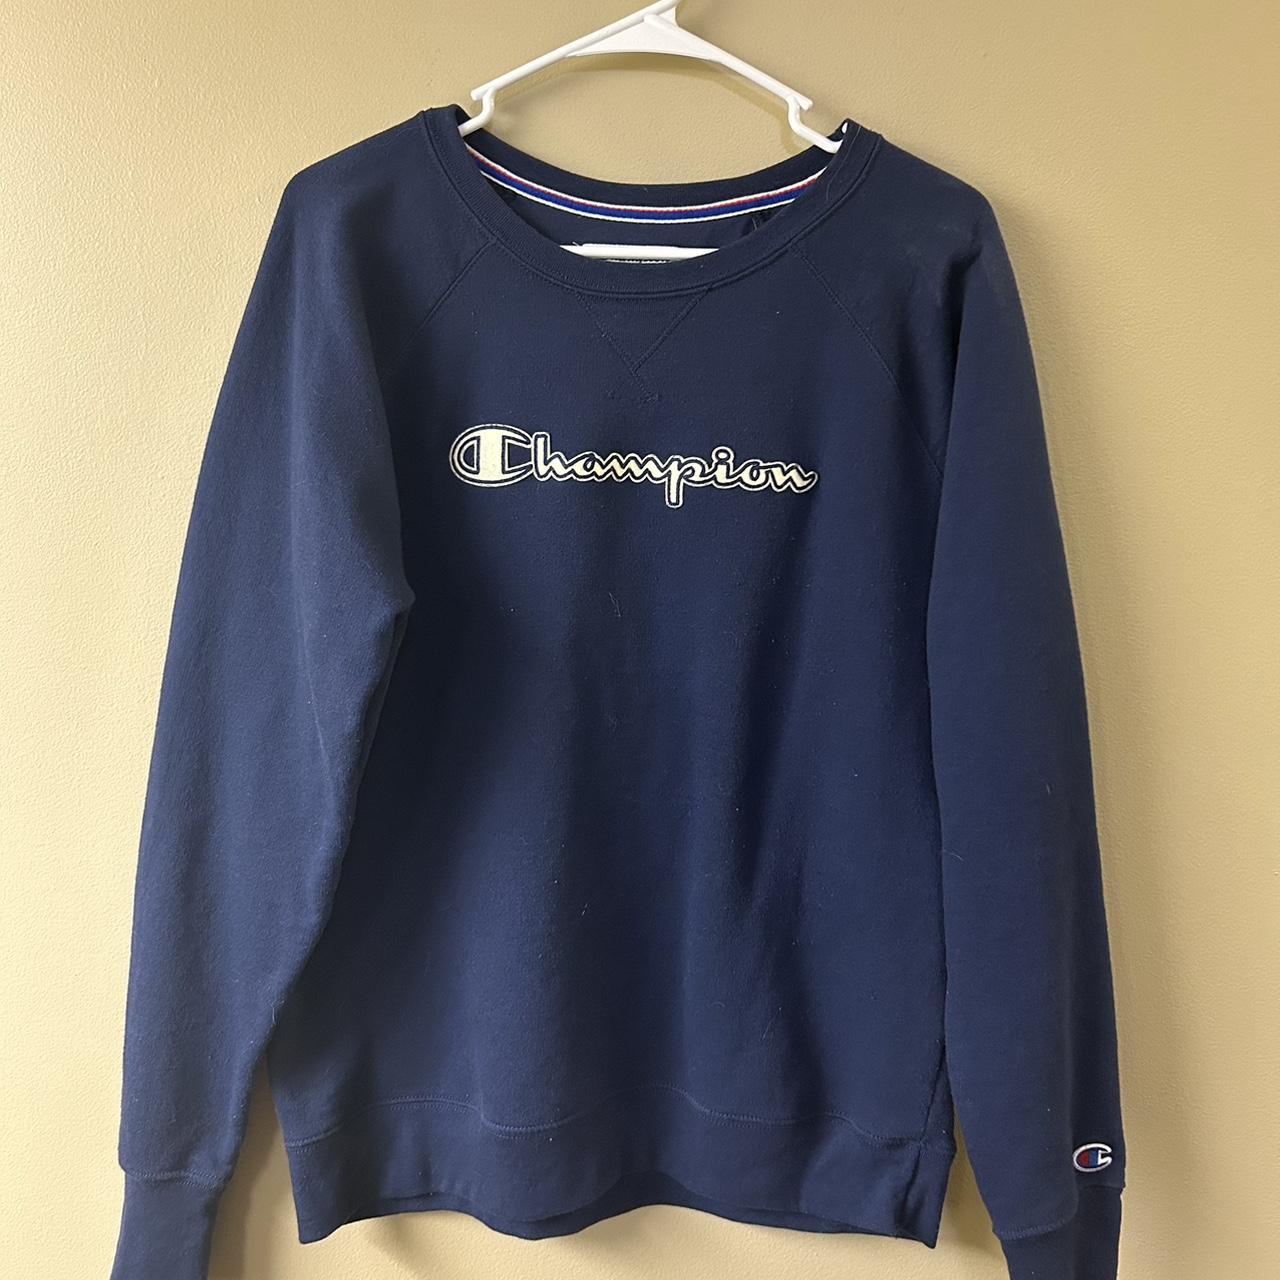 Champion Sweater. Great condition size L - Depop